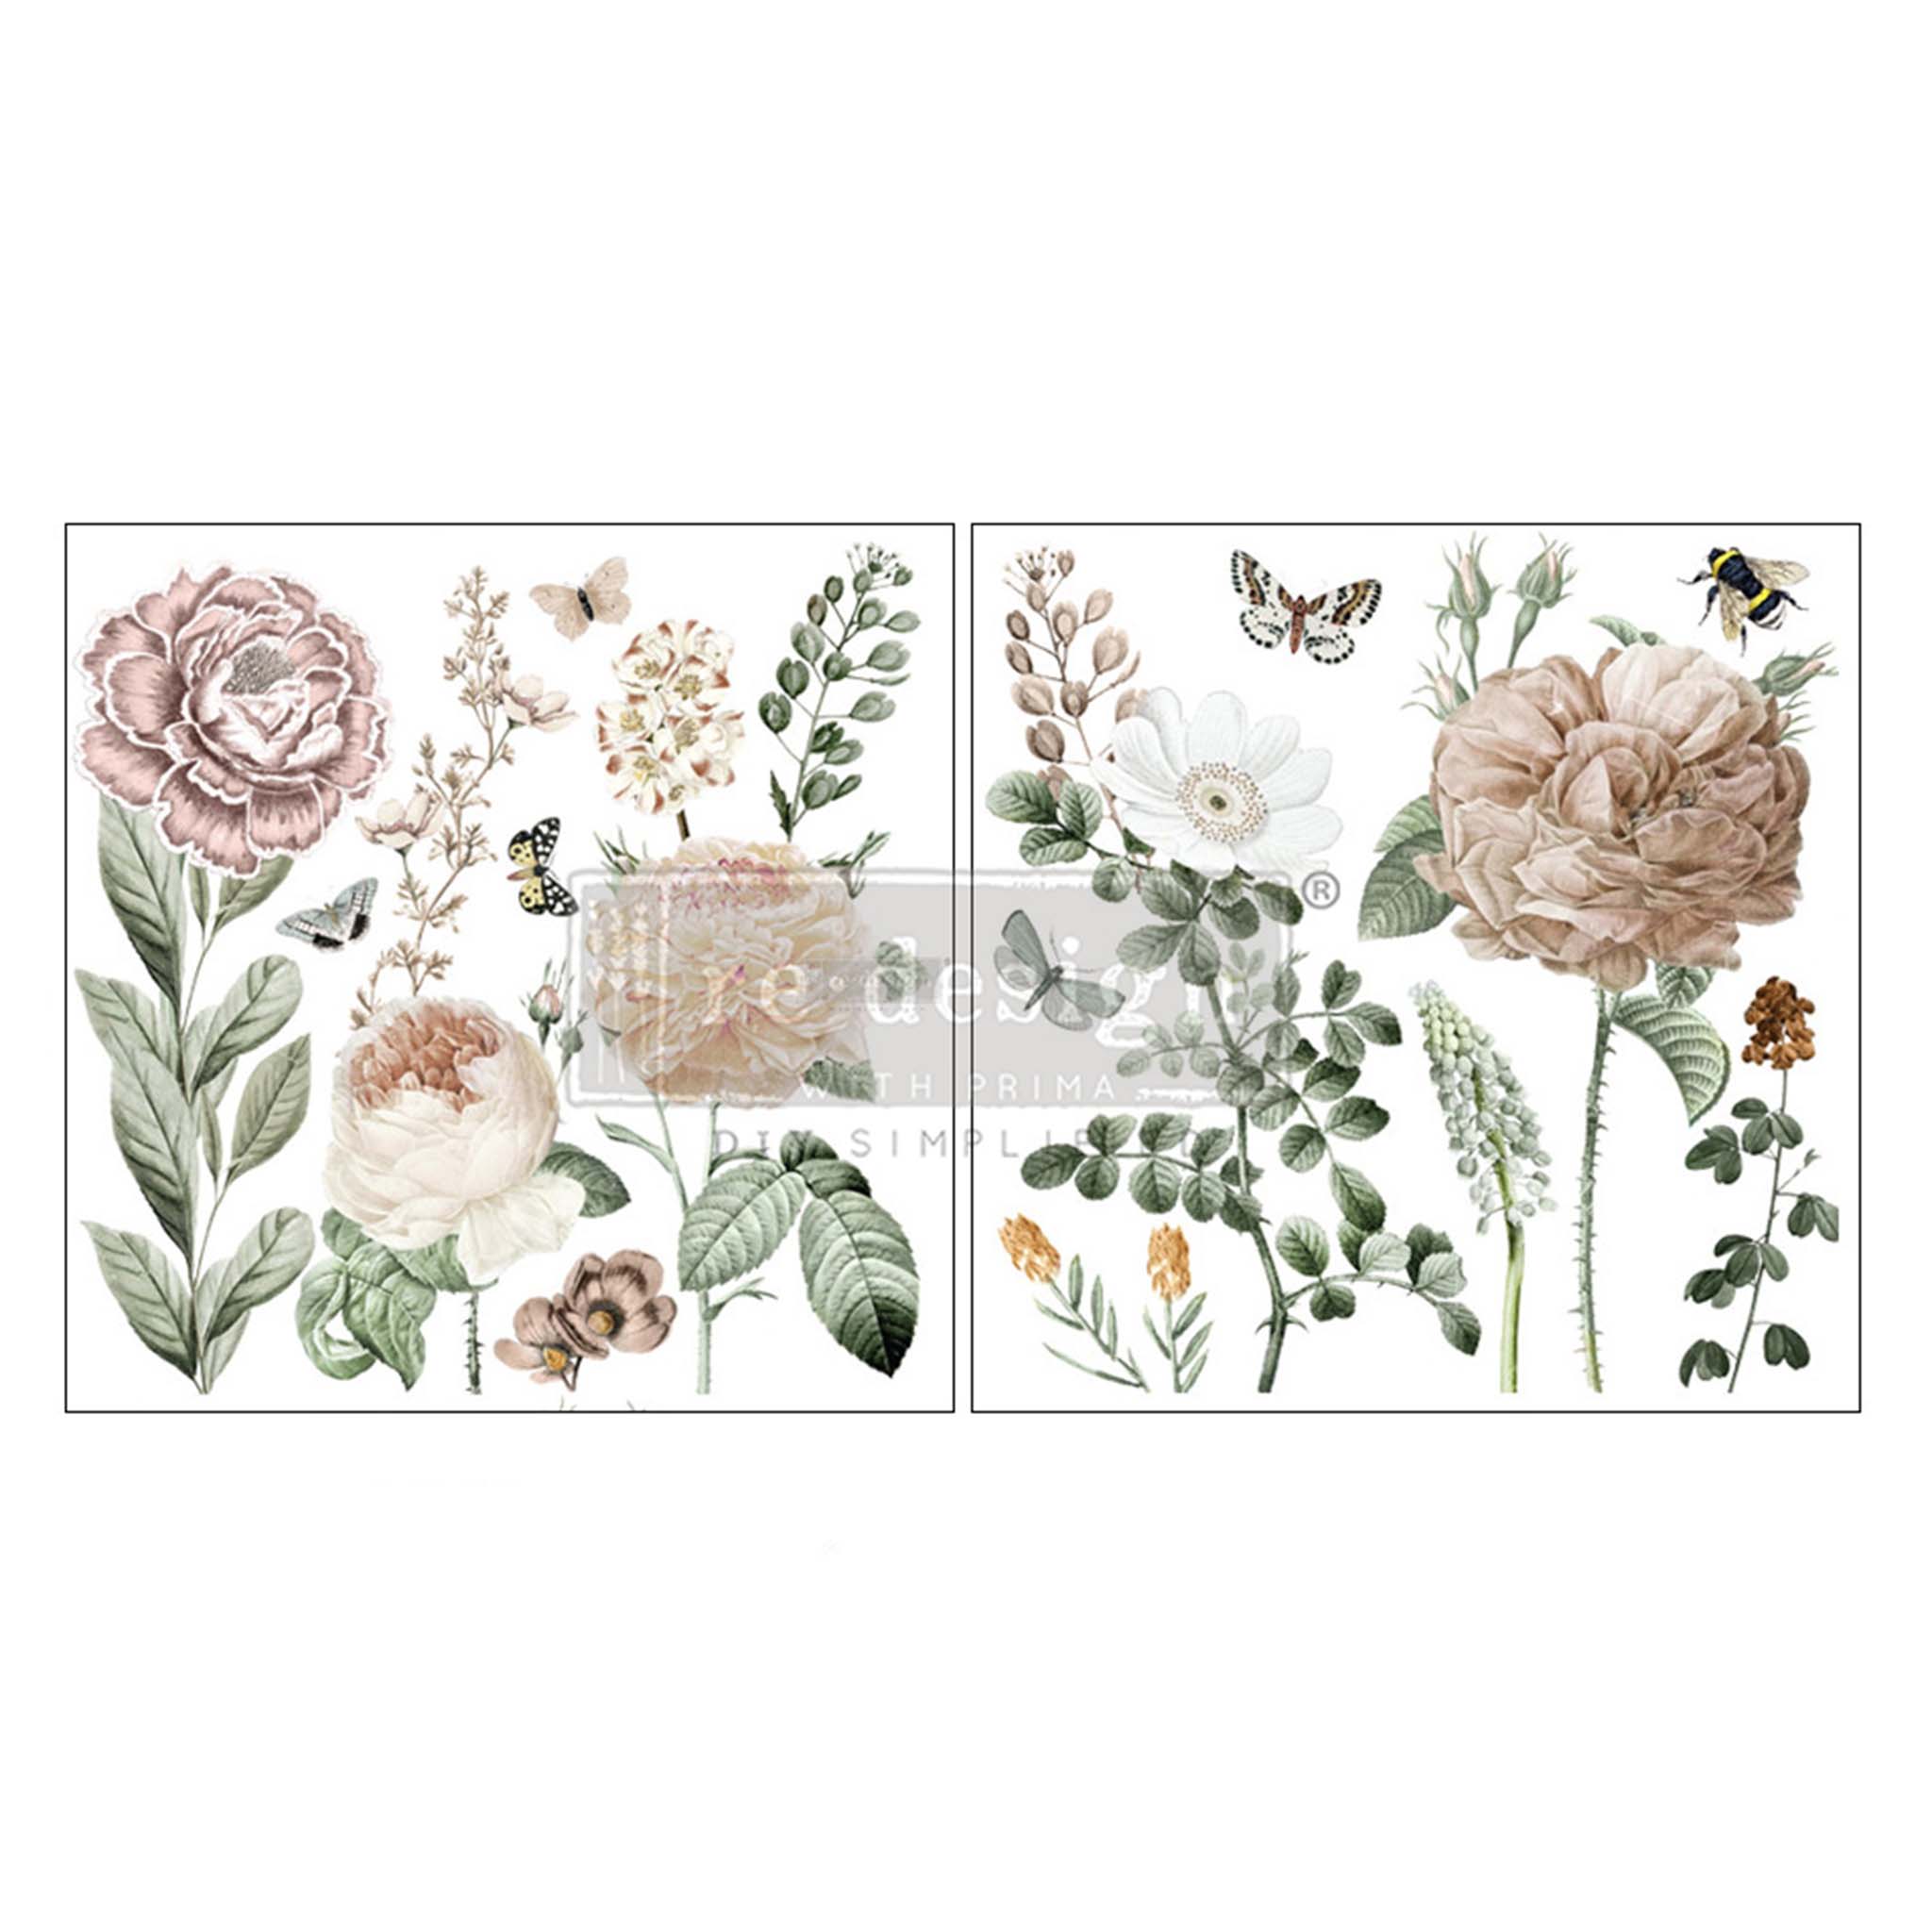 Small rub-on transfer design of 2 sheets featuring lightly colored wildflowers with butterflies.